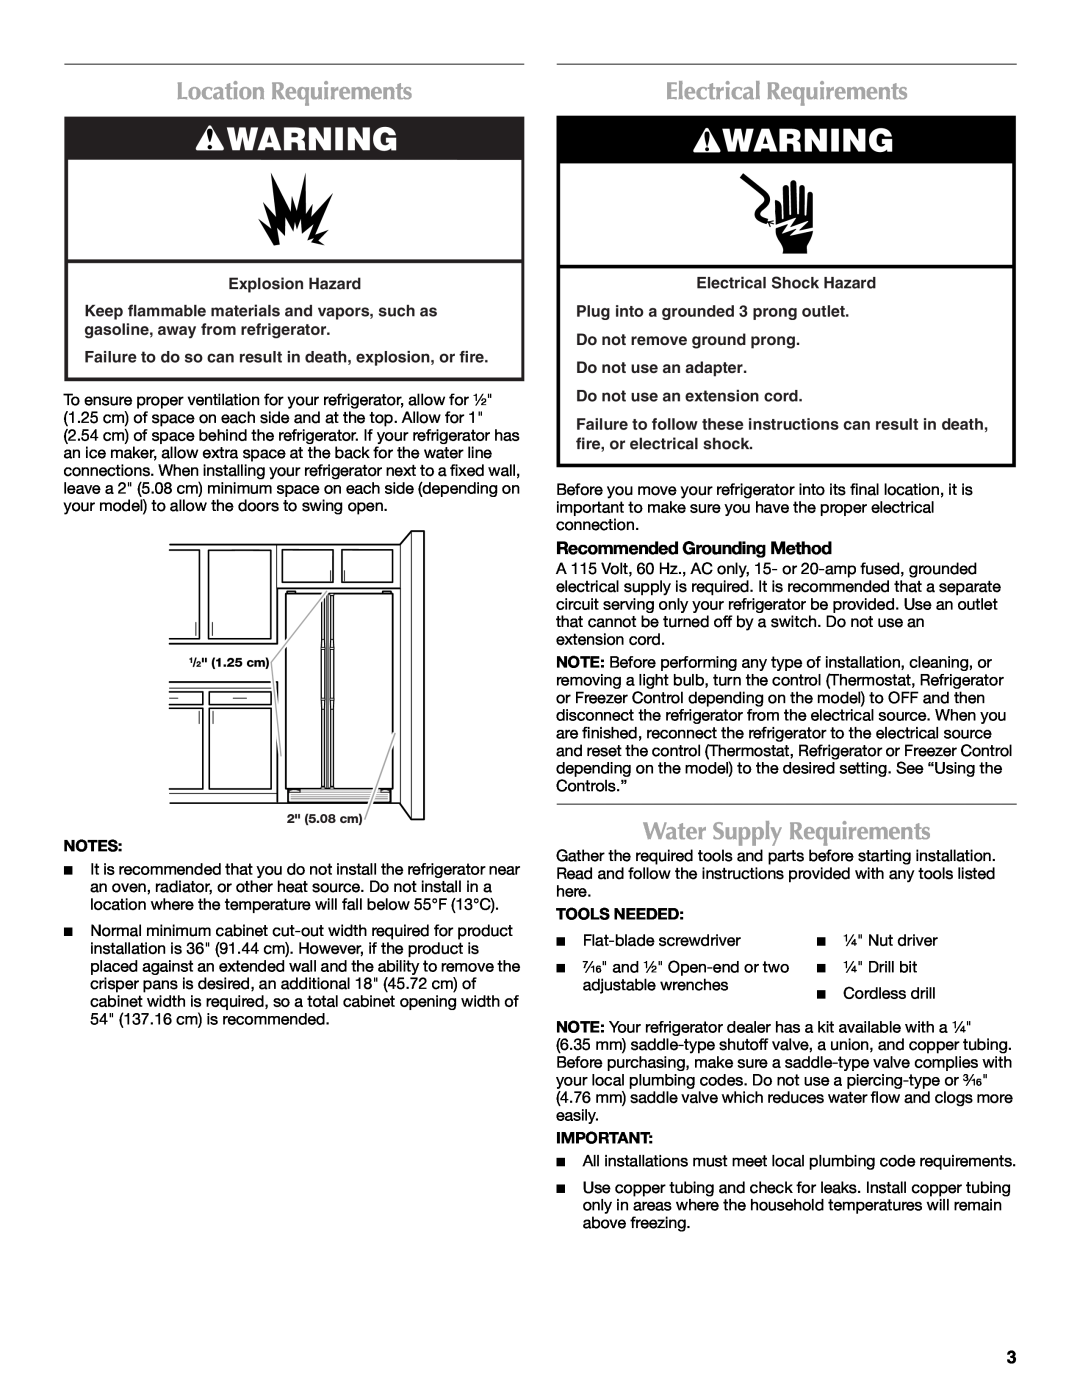 Maytag W10321475A Location Requirements, Electrical Requirements, Water Supply Requirements, Recommended Grounding Method 